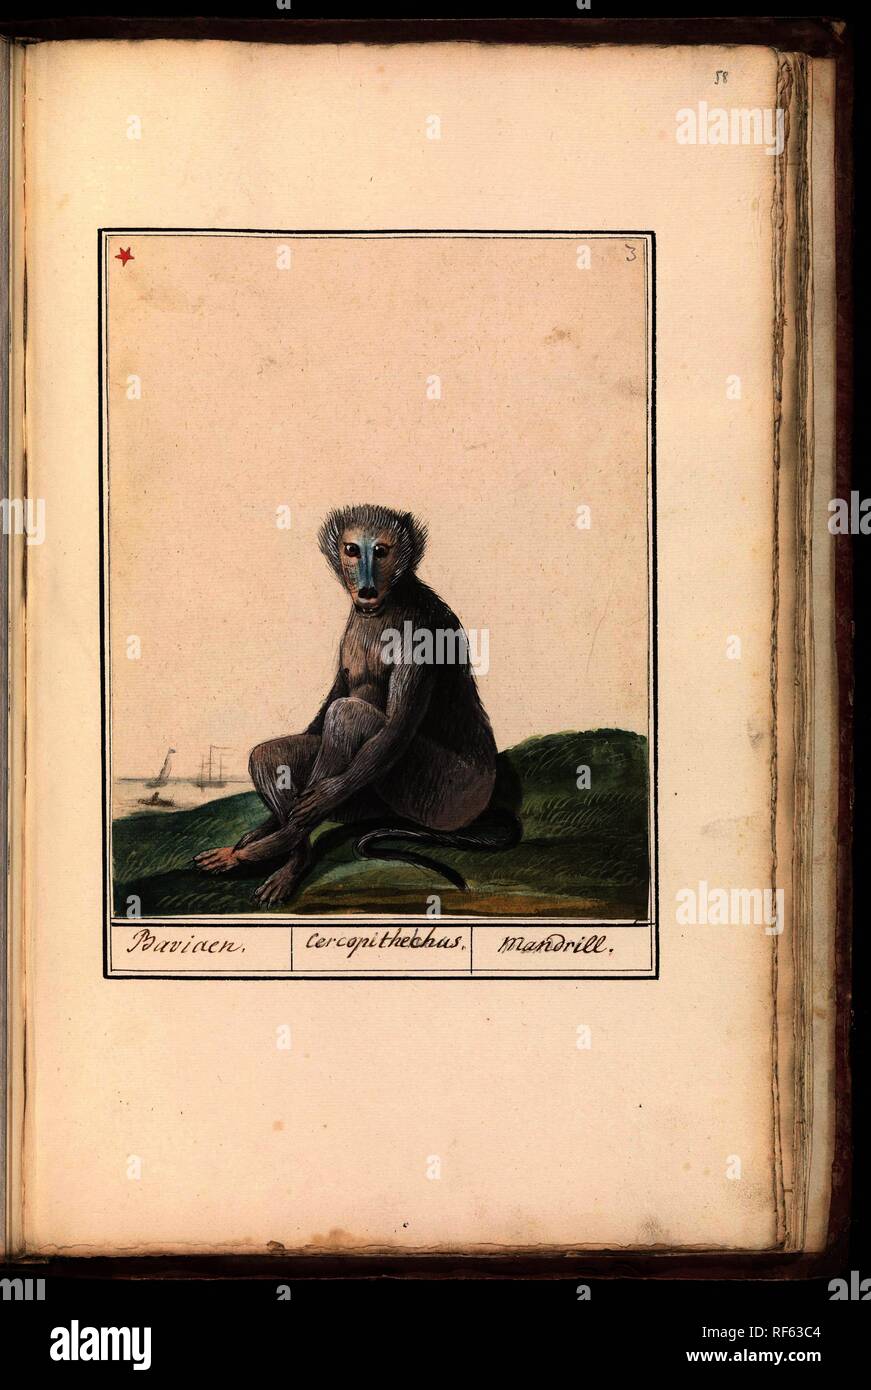 Mandril (Mandrillus sphinx). Baviaen. / Cercopithechus. / Mandrill (title on object). Draughtsman: anonymous. Dating: 1790 - 1814. Place: Southern Netherlands. Measurements: h 241 mm × w 189 mm. Museum: Rijksmuseum, Amsterdam. Stock Photo